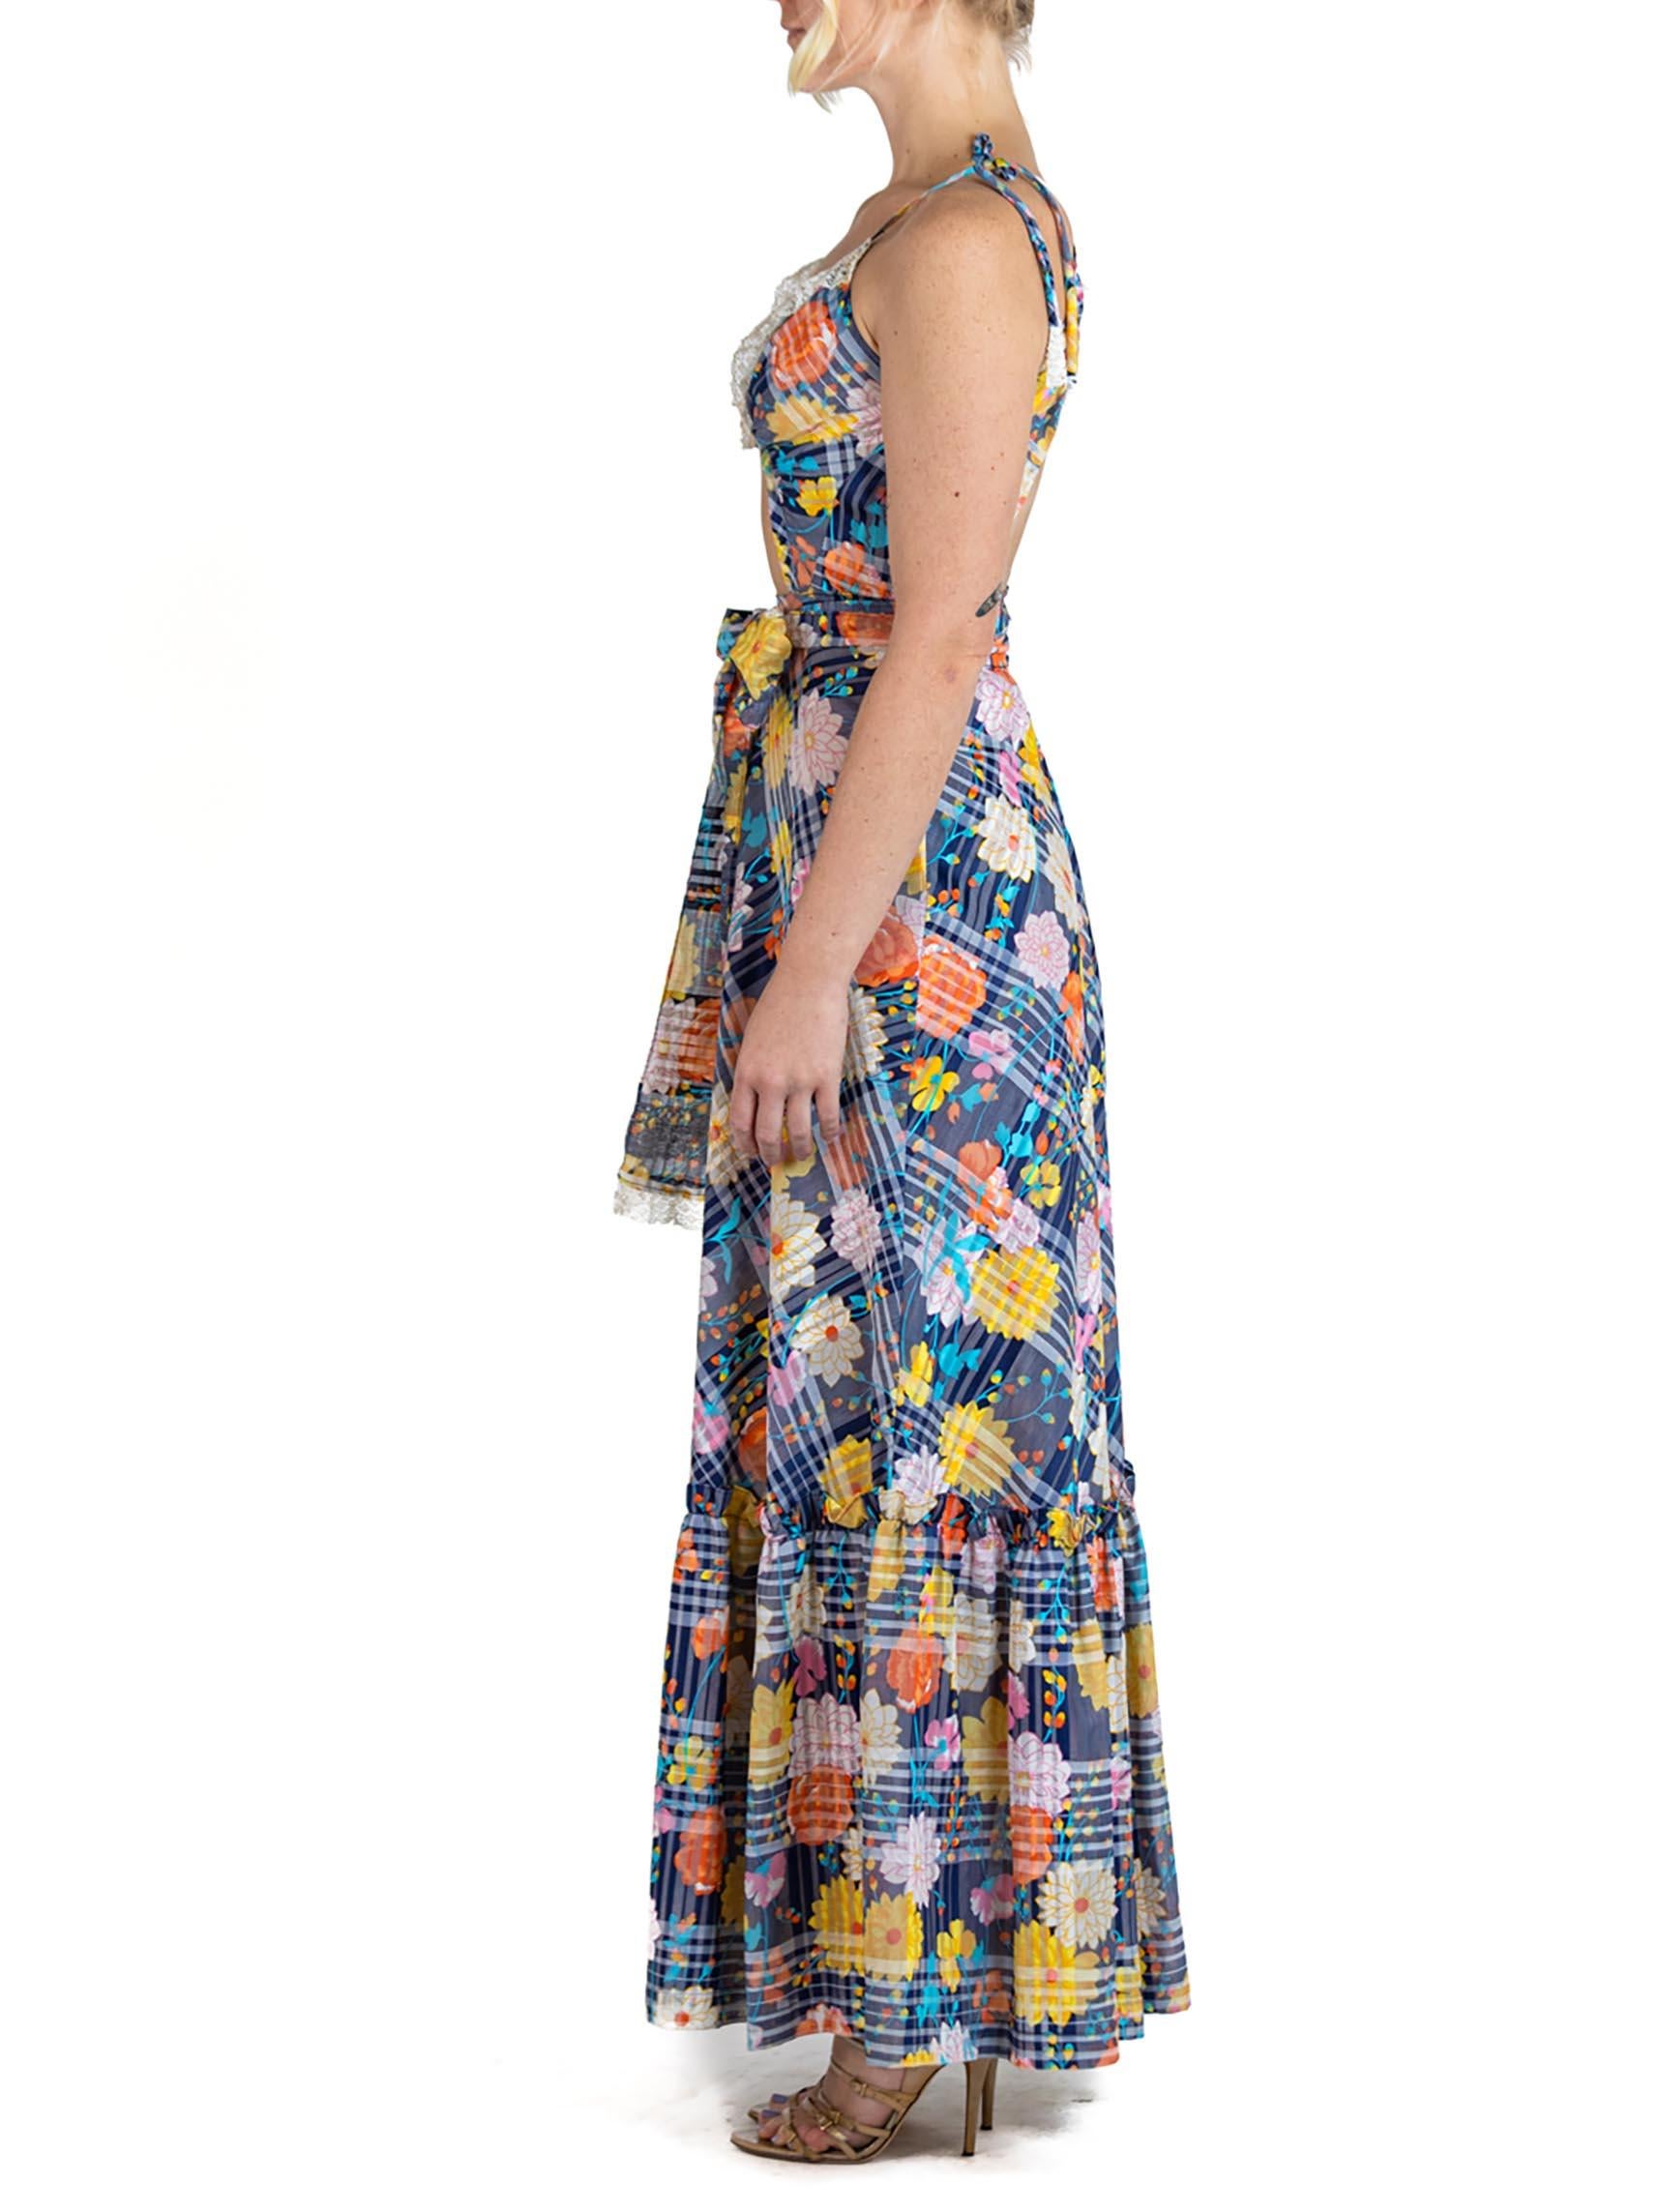 MORPHEW ATELIER Multicolor Blue Floral Backless Cut-Out Summer Dress In Excellent Condition For Sale In New York, NY